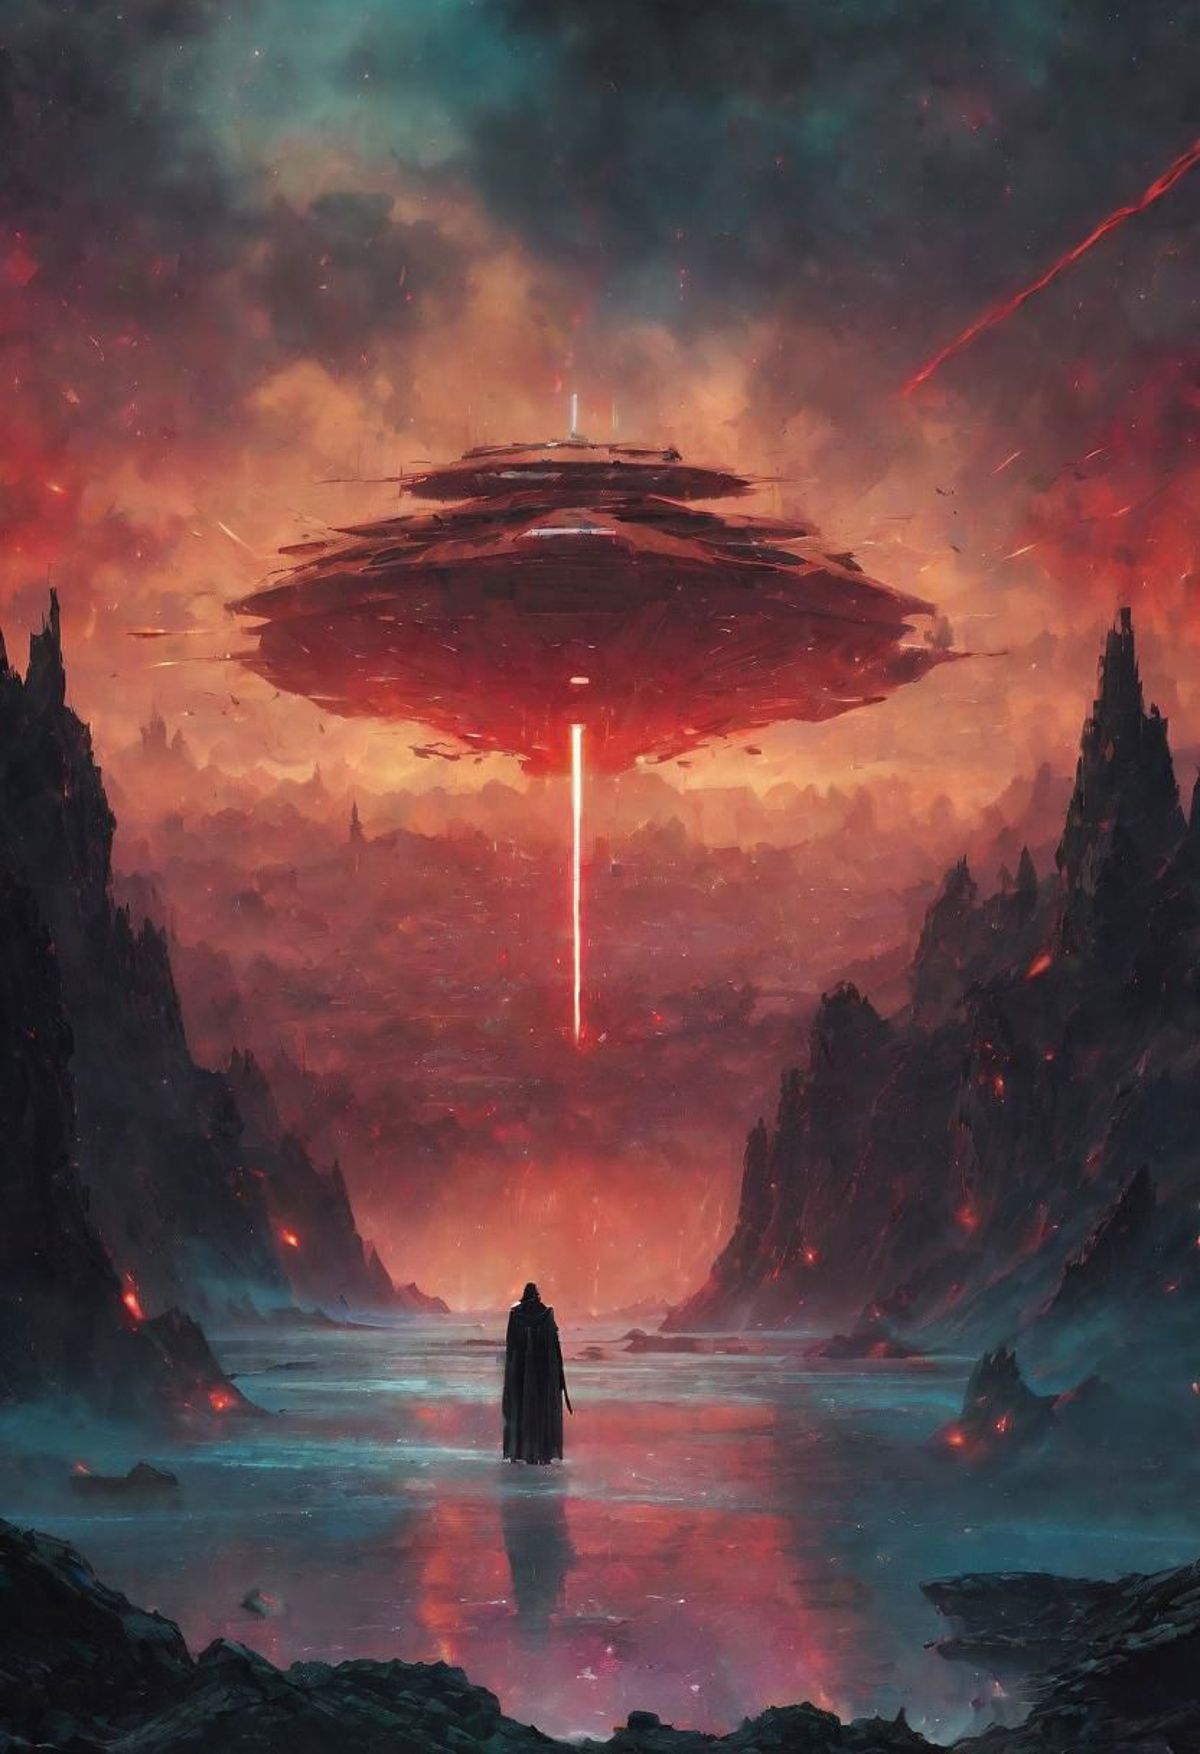 A person standing under a spaceship in a painting.